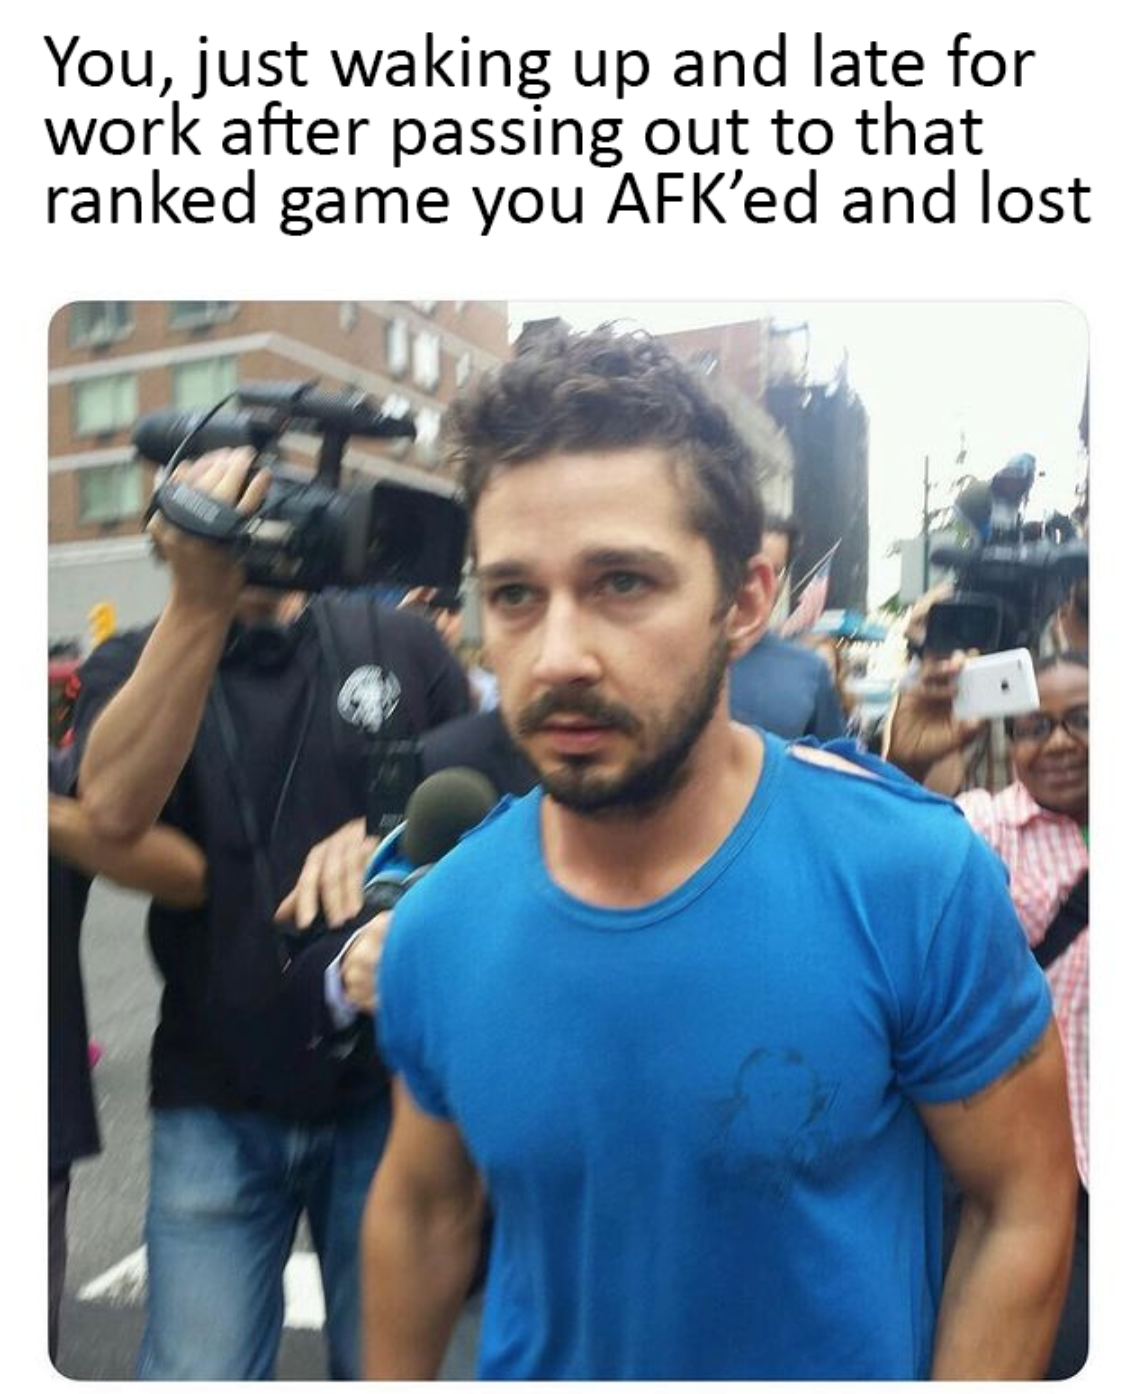 gaming memes and pics - shia labeouf coffee meme - You, just waking up and late for work after passing out to that ranked game you Afk'ed and lost